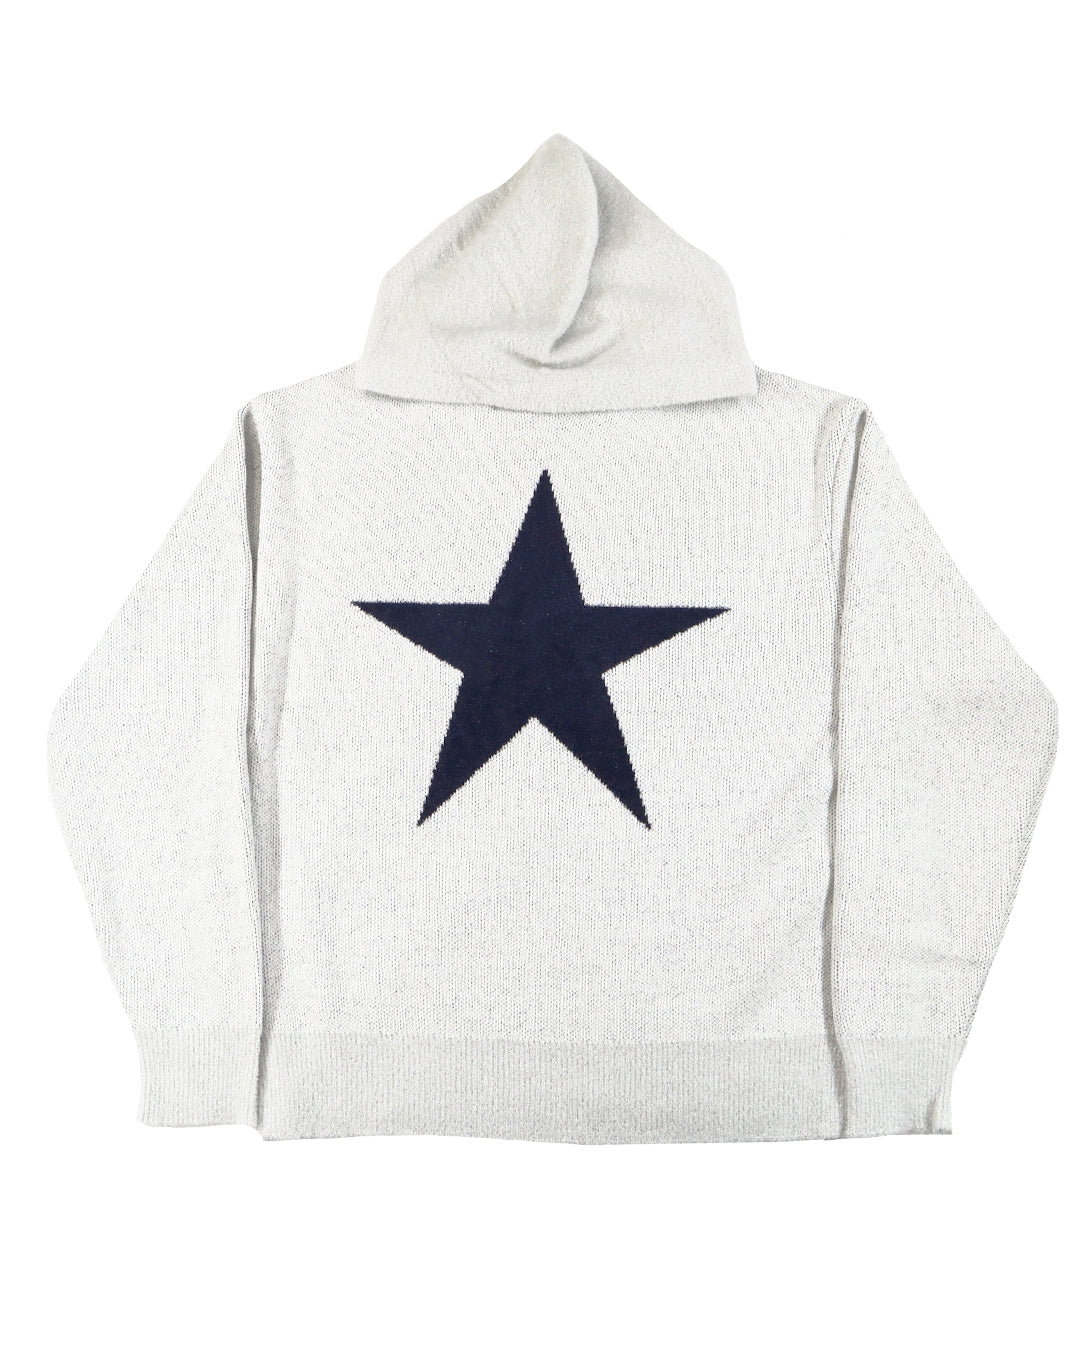 LIBERAL ARTS STAR GRITTER HOODY (WHITE/NAVY)